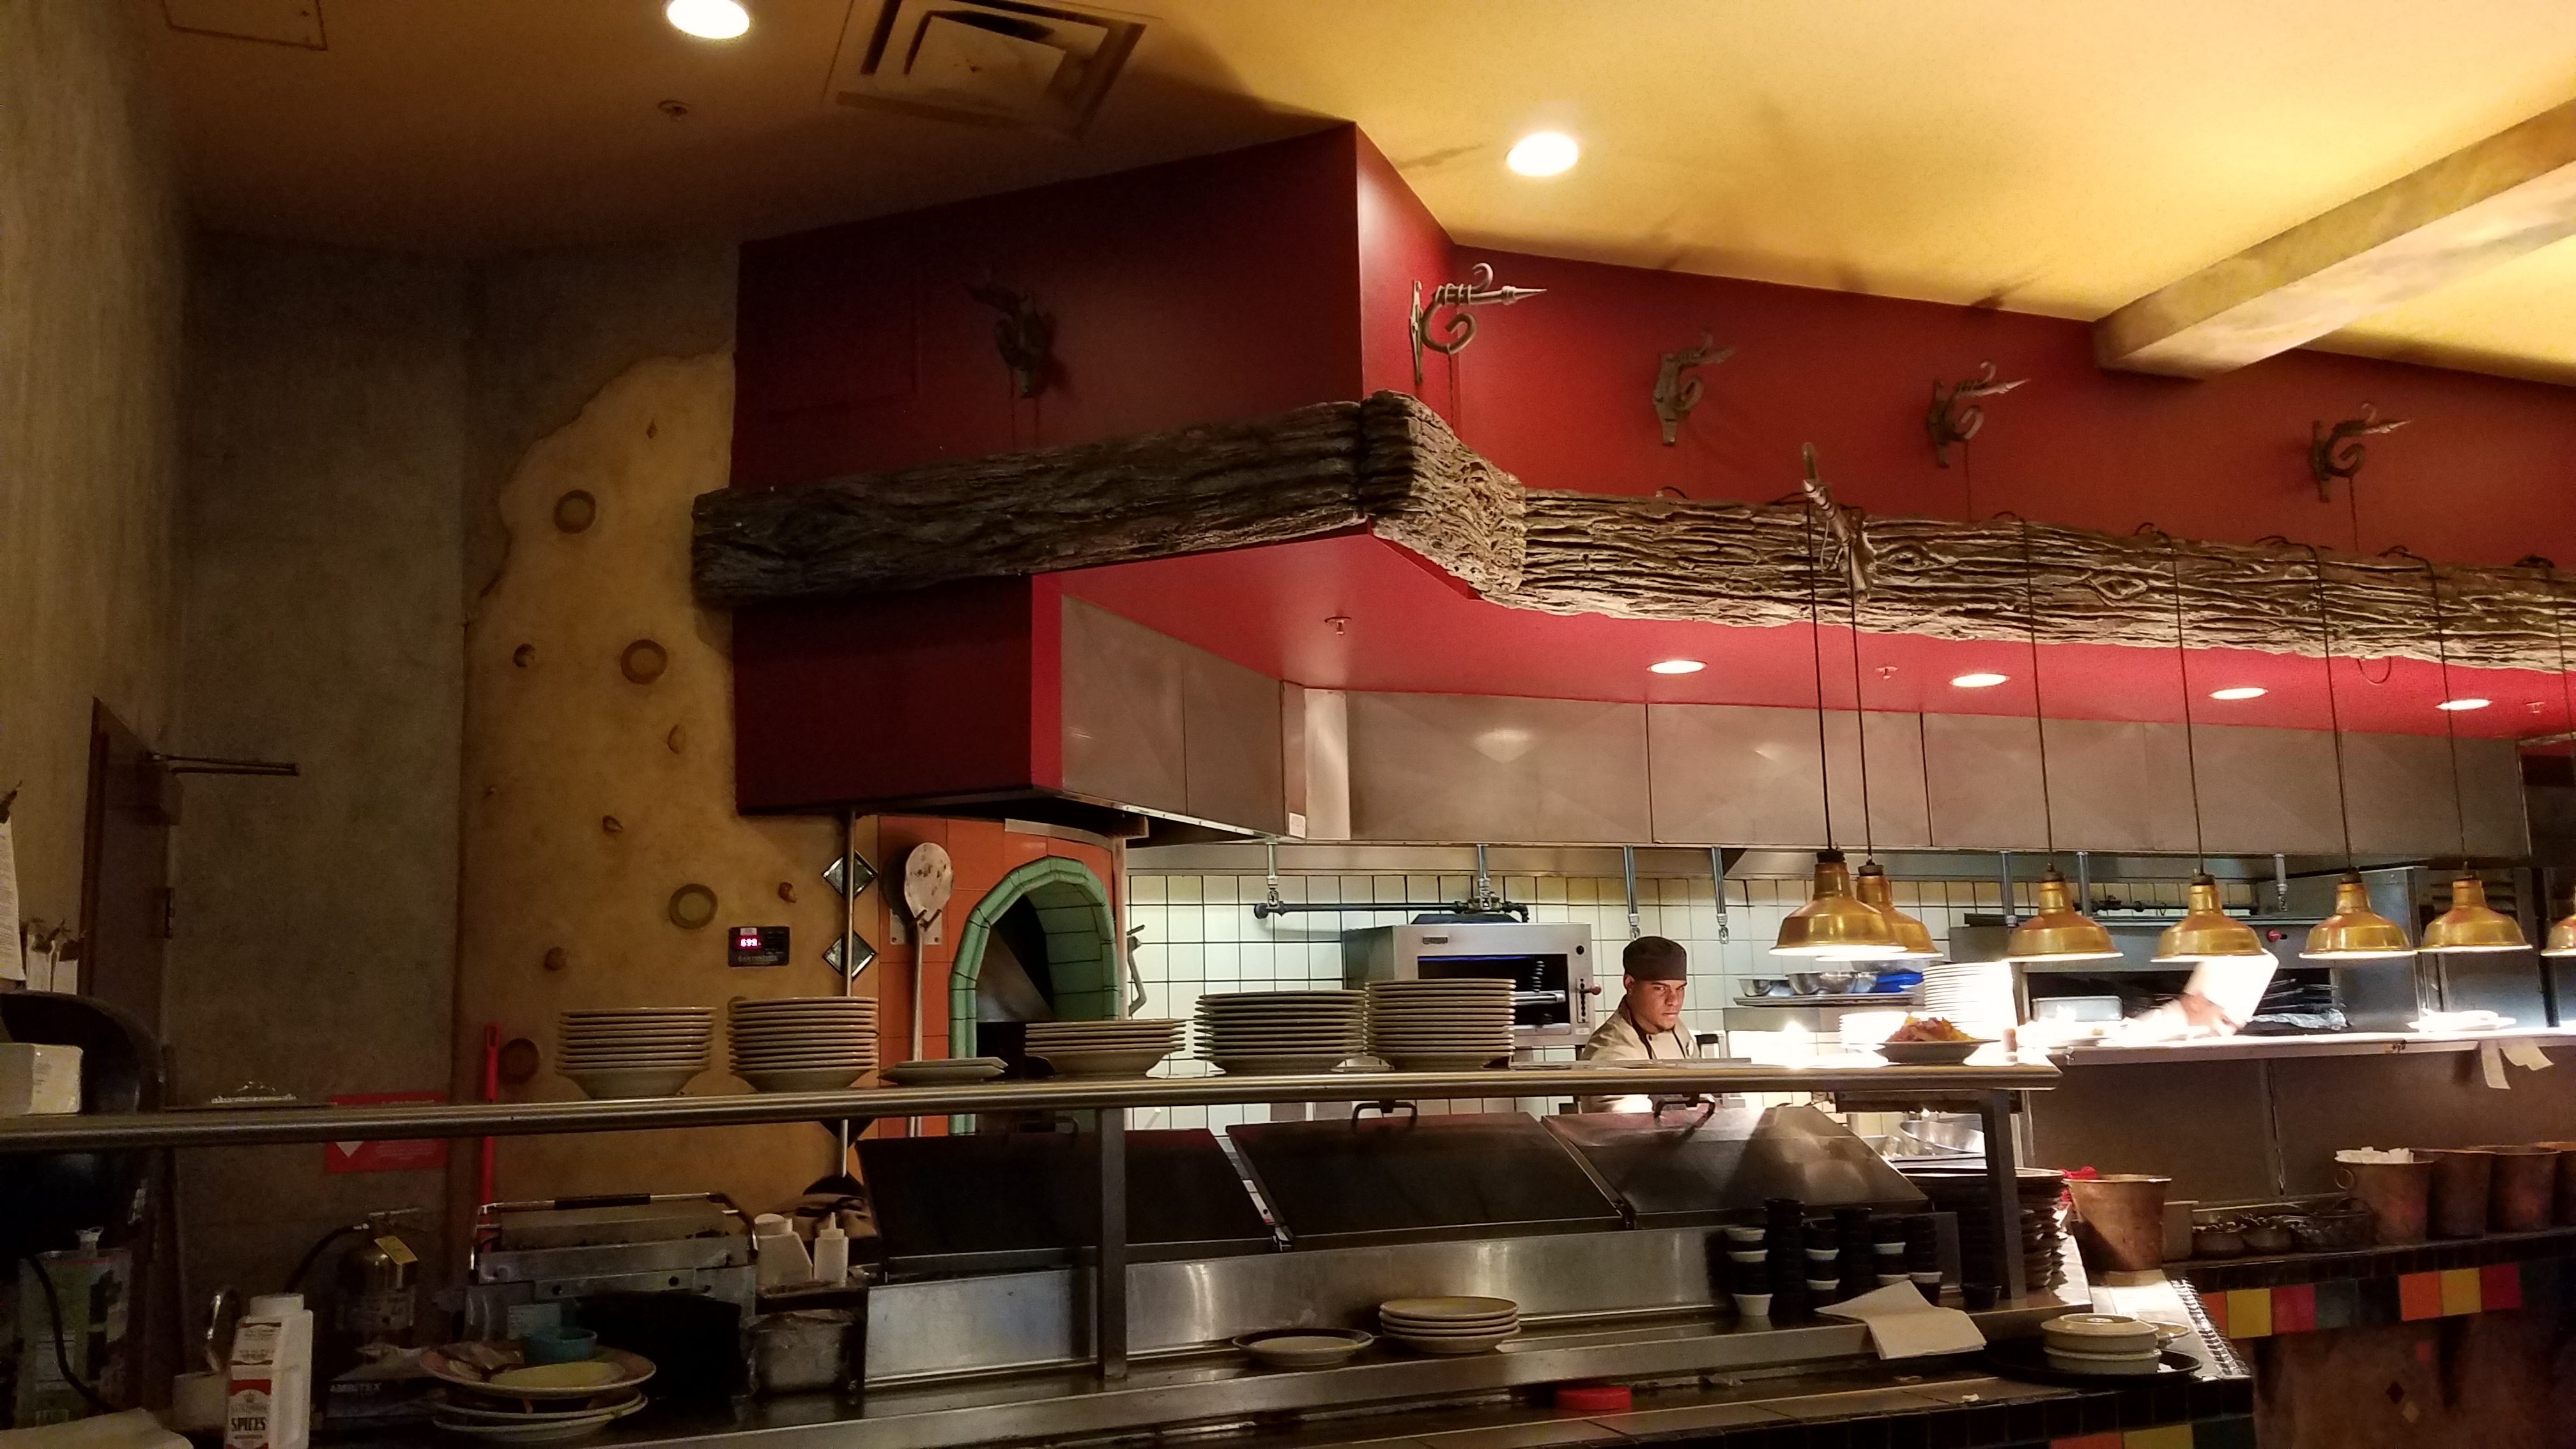 Open kitchen at Confisco Grille - Dining Review - Islands of Adventure - Universal Orlando Resort - unofficialuniversal.com.